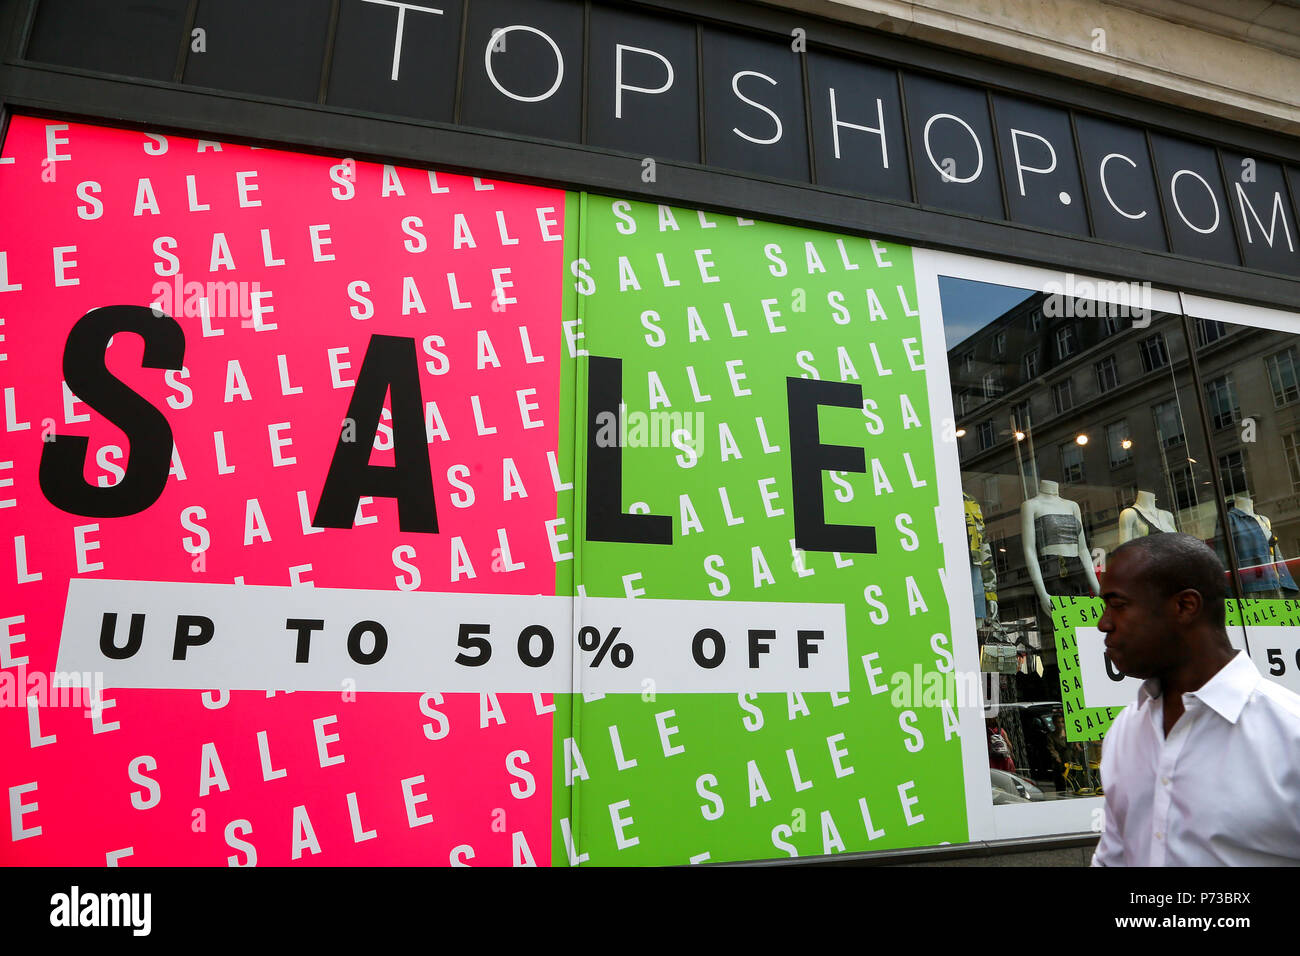 Oxford Street London. UK 4 July 2018 - Summer sales in Topshop store on  Oxford Street with up to 50% off. Shoppers walk past the summer sale window  display in stores on